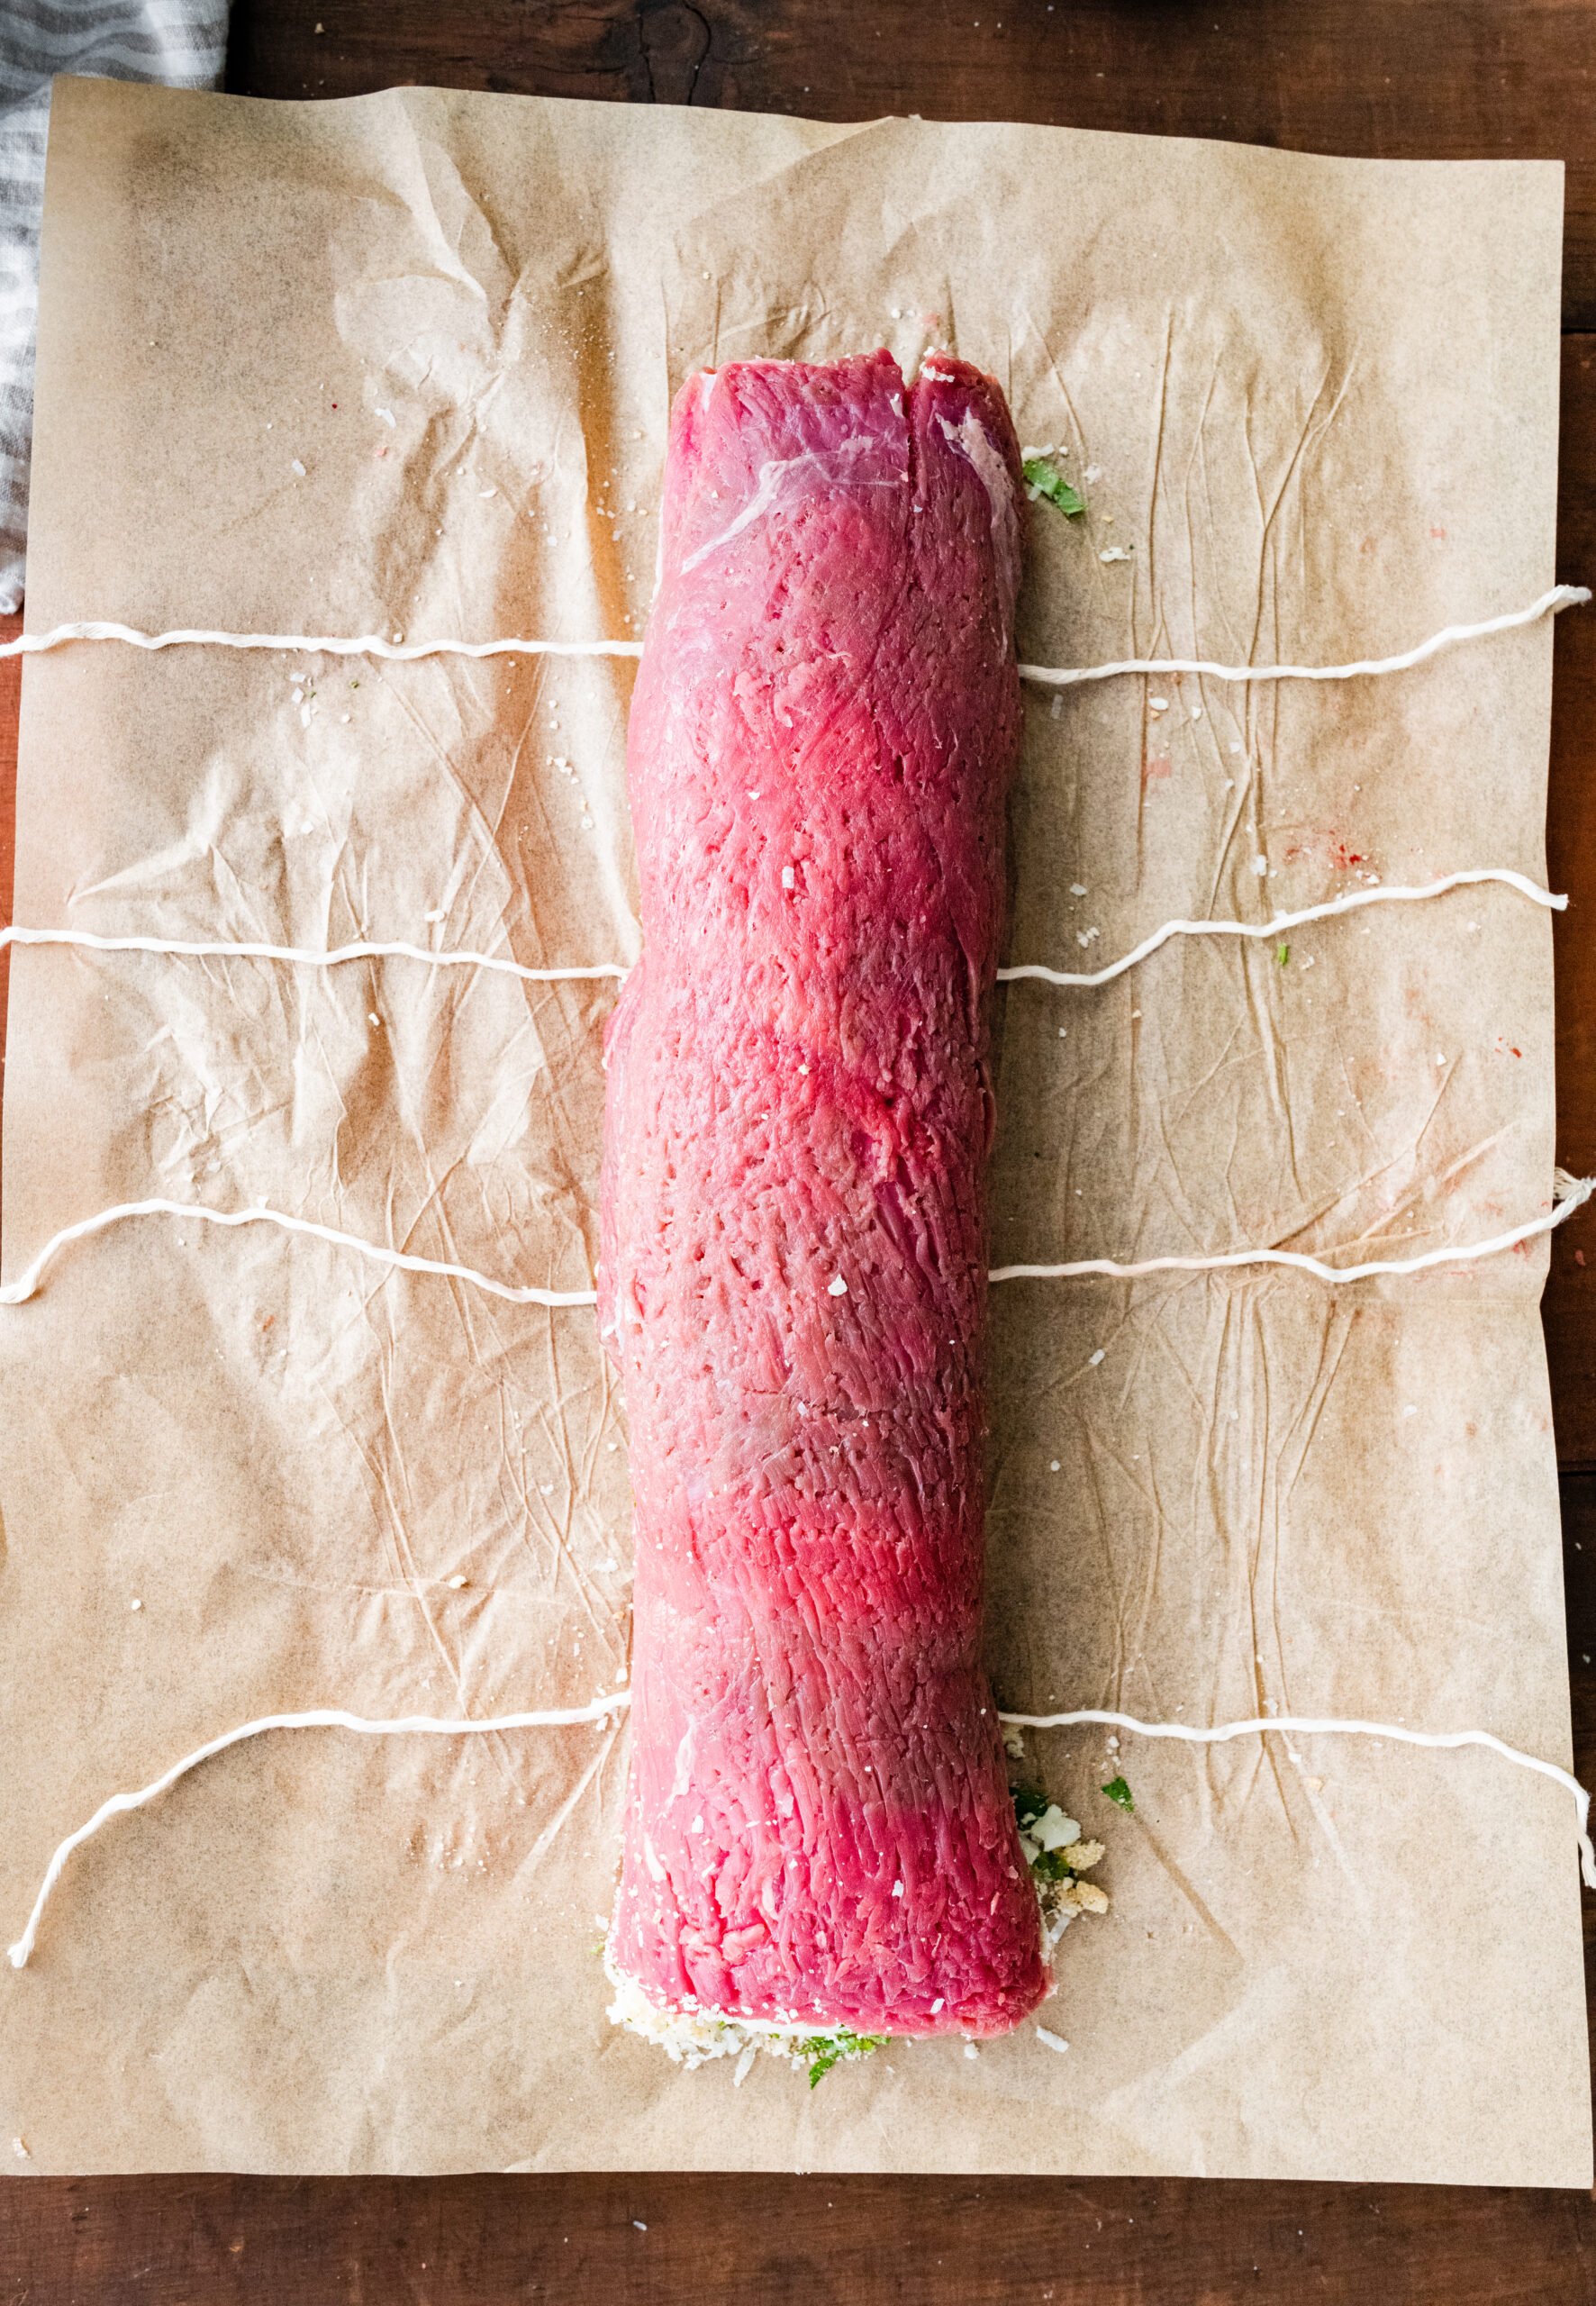 How to make Italian Braciole Process: tying the beef roll with butcher's twine